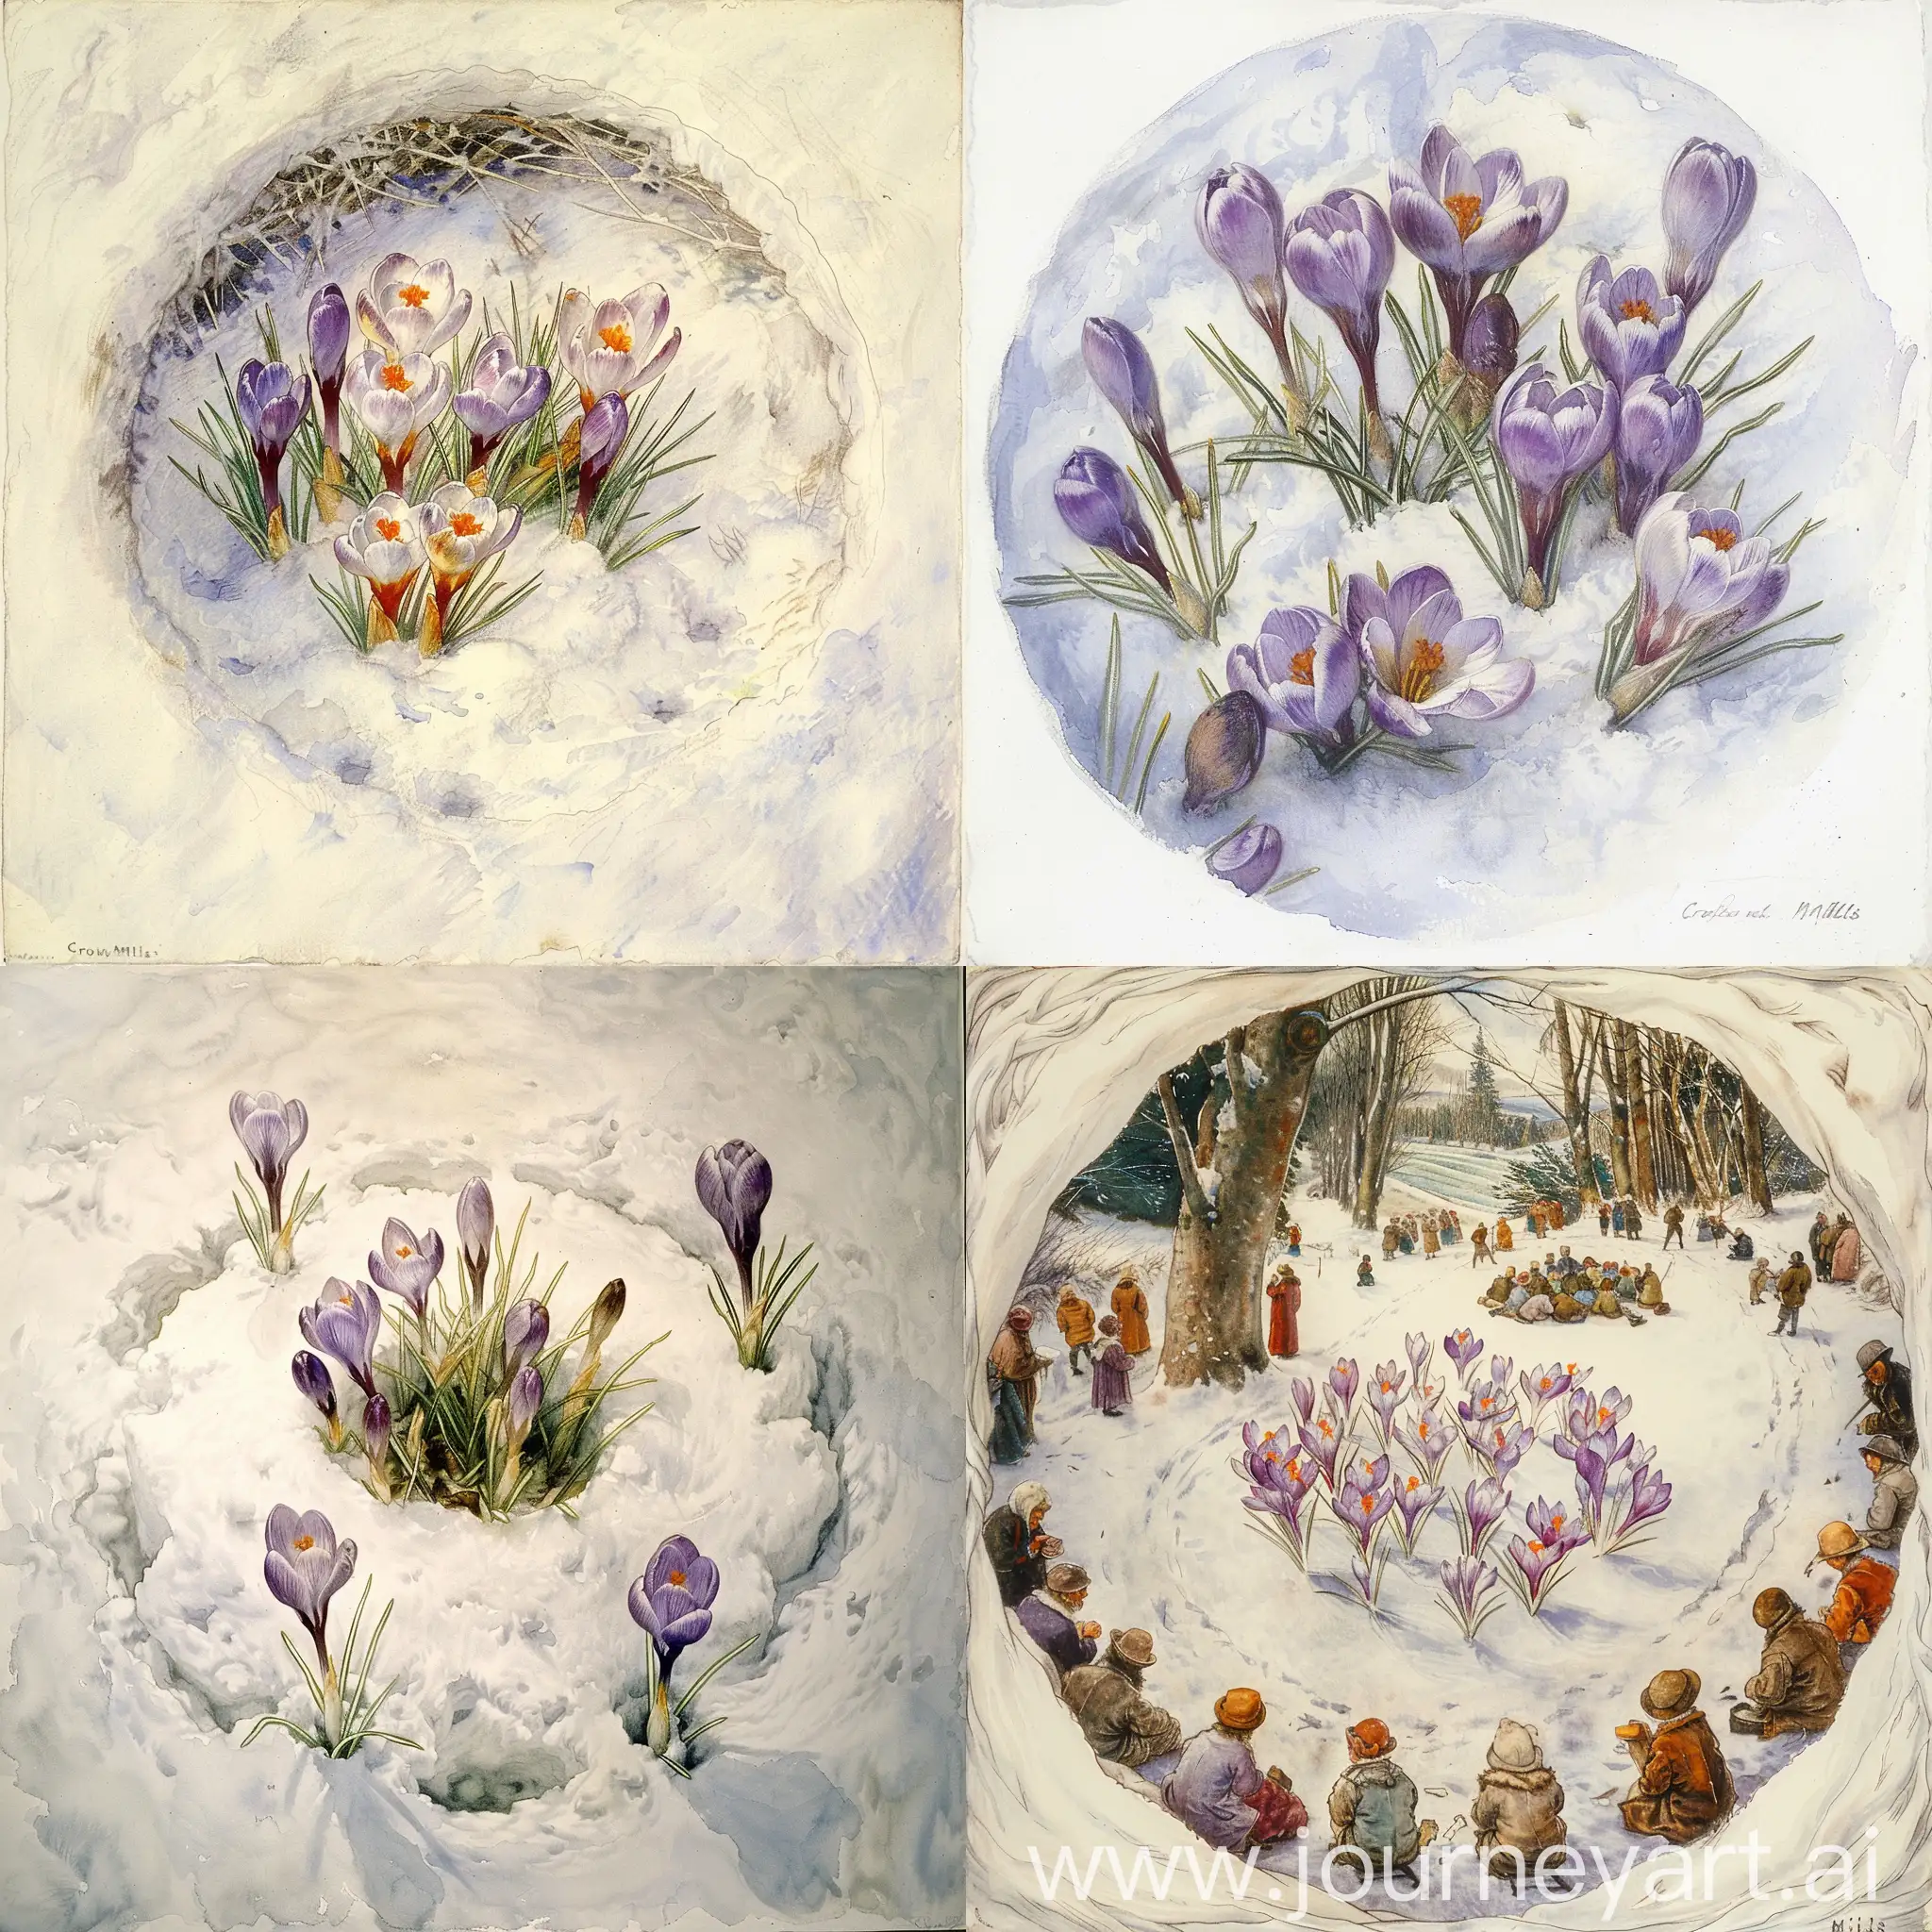 Vibrant-Crocuses-in-Snow-Rich-Watercolor-Painting-by-Millais